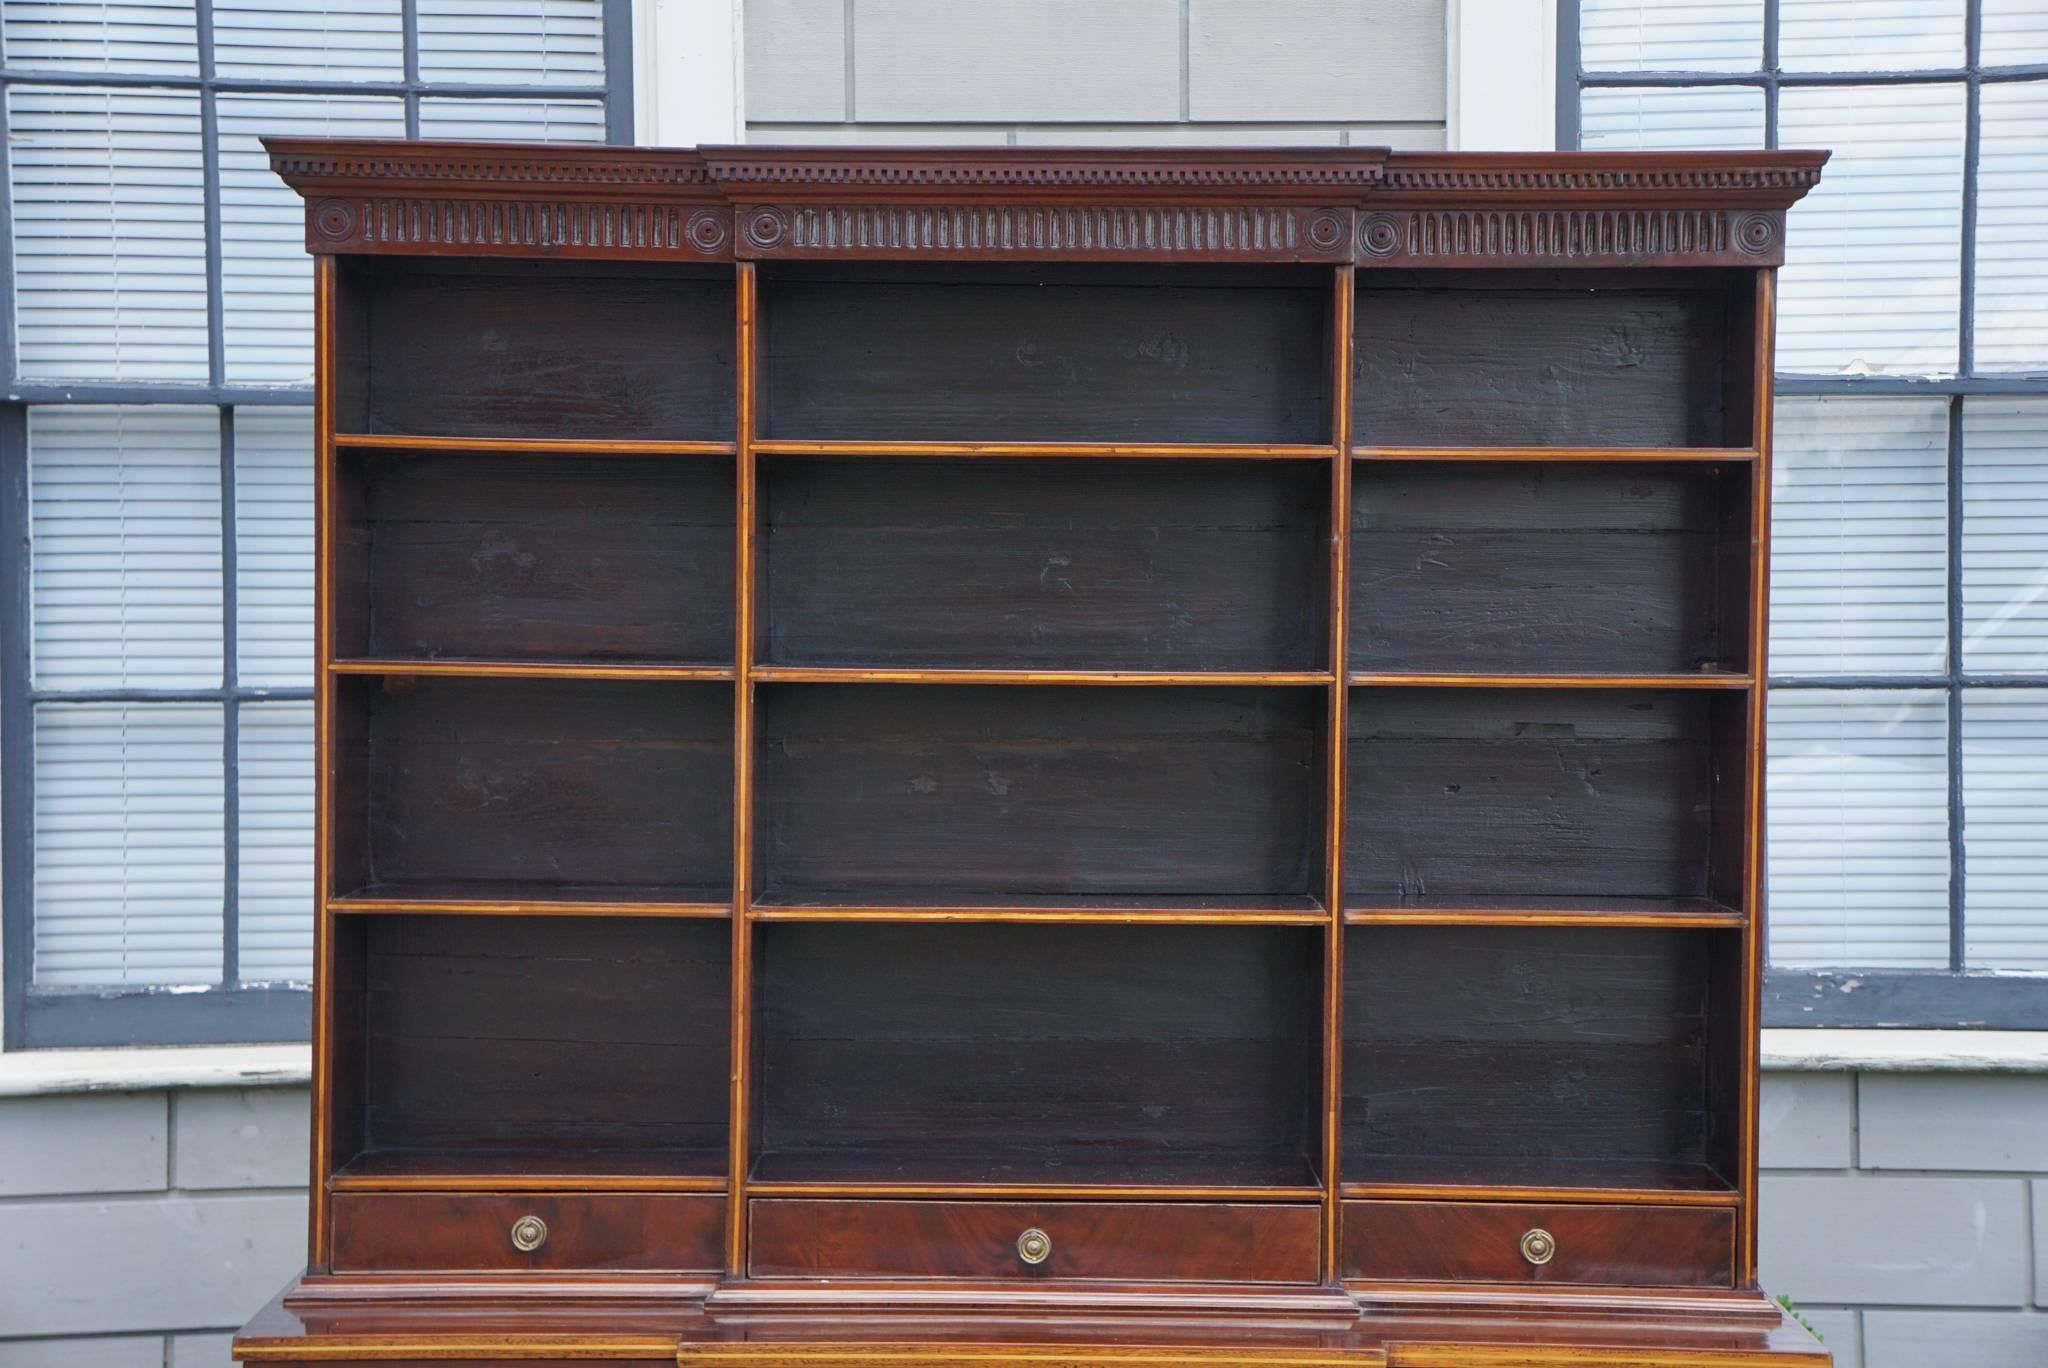 This nice open bookcase of easy to use small size was made in England at the end of the reign of George III circa 1800 to 1805. Just before the Regency period which this shows some affinity with by its use of a decidedly contrasting satin wood